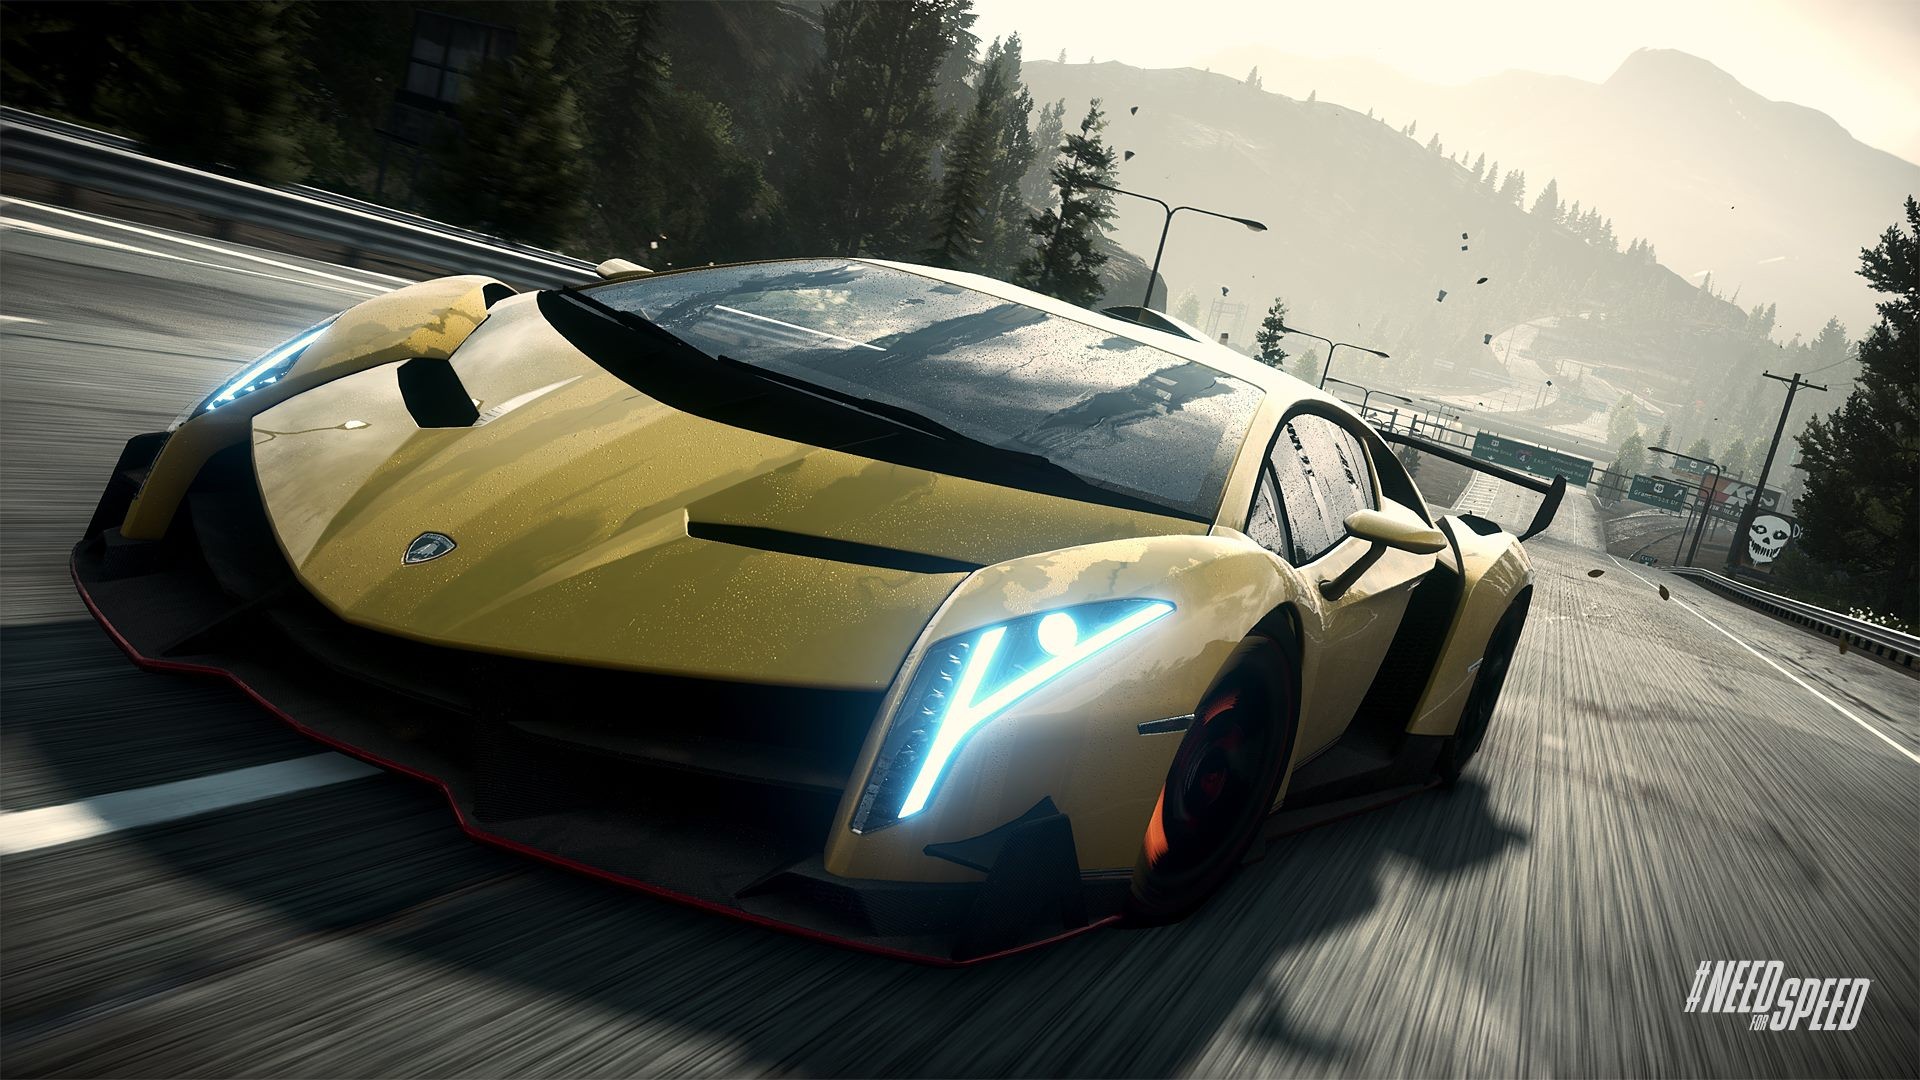 General 1920x1080 car Need for Speed video games yellow cars vehicle supercars racing